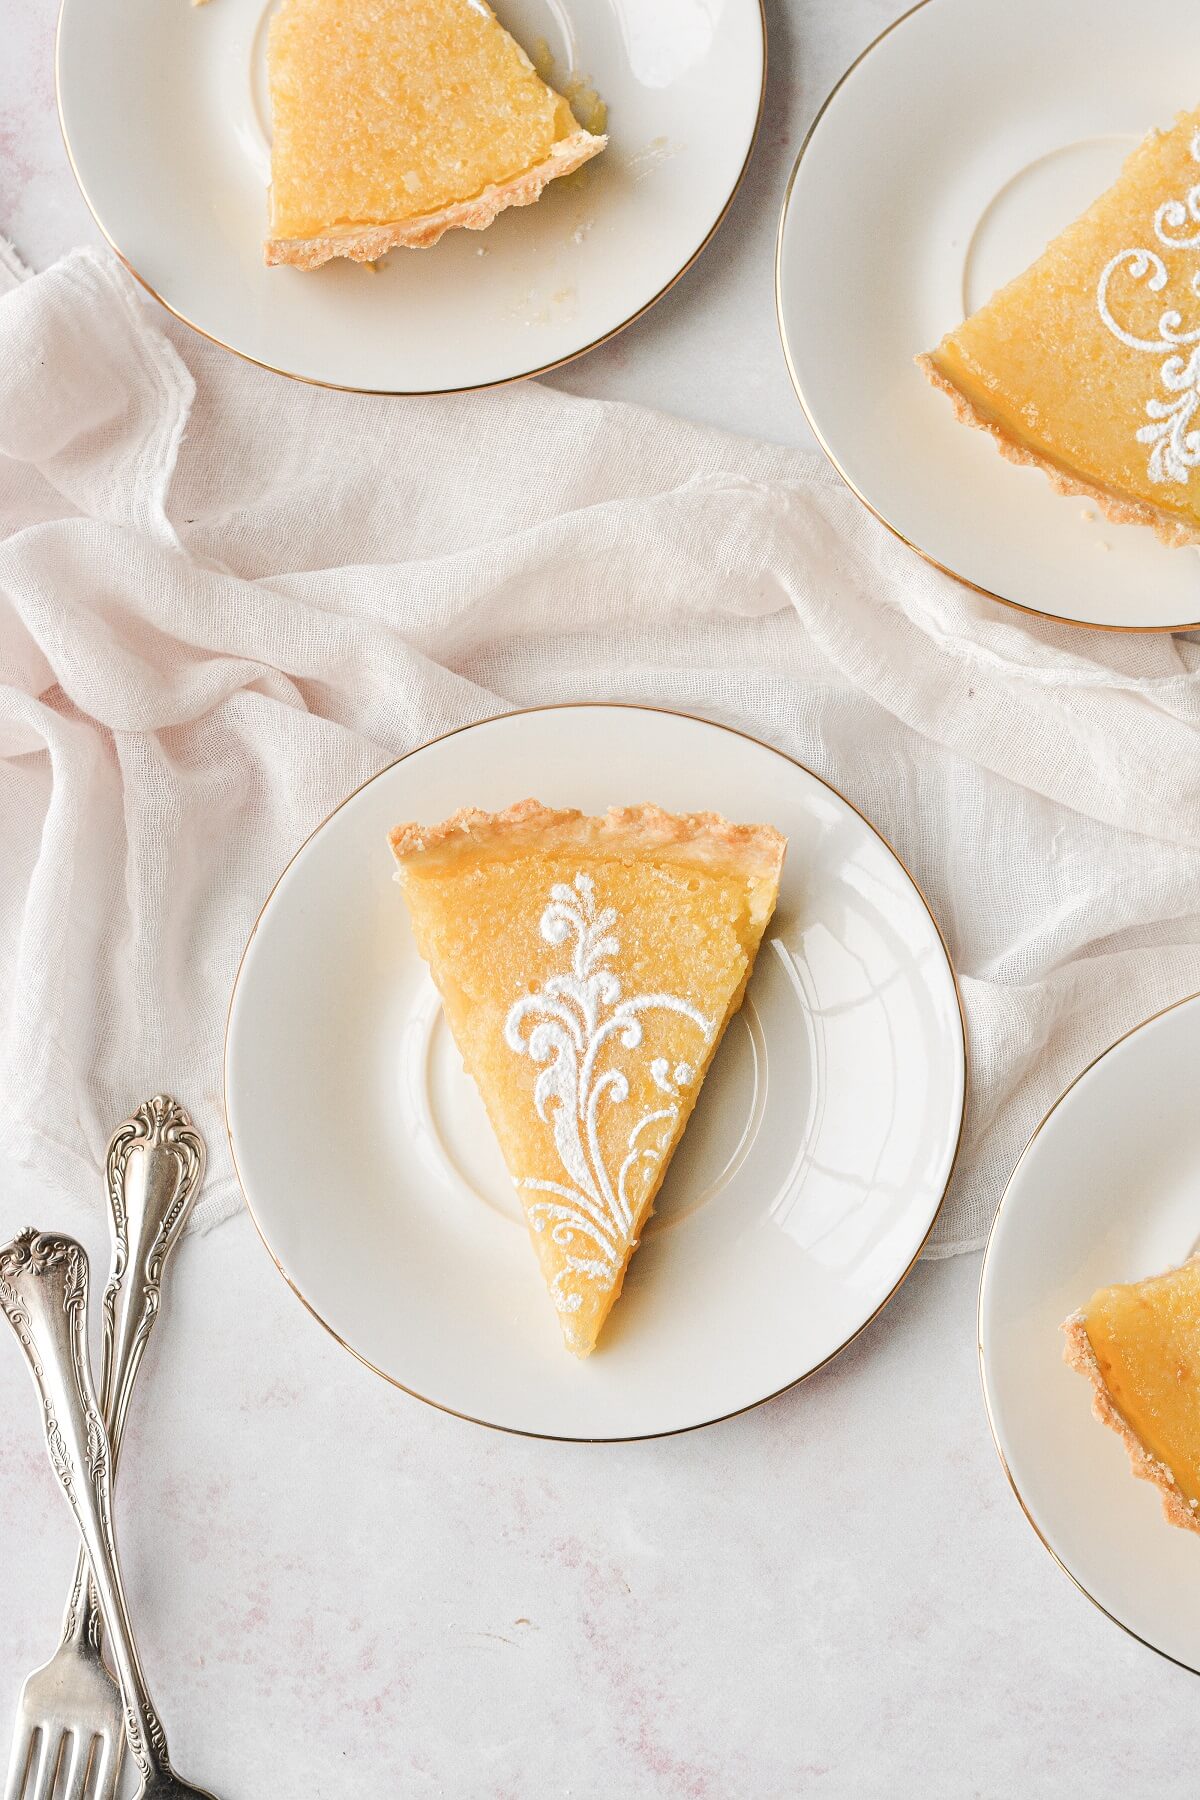 Slices of lemon tart with a powdered sugar stencil on top.